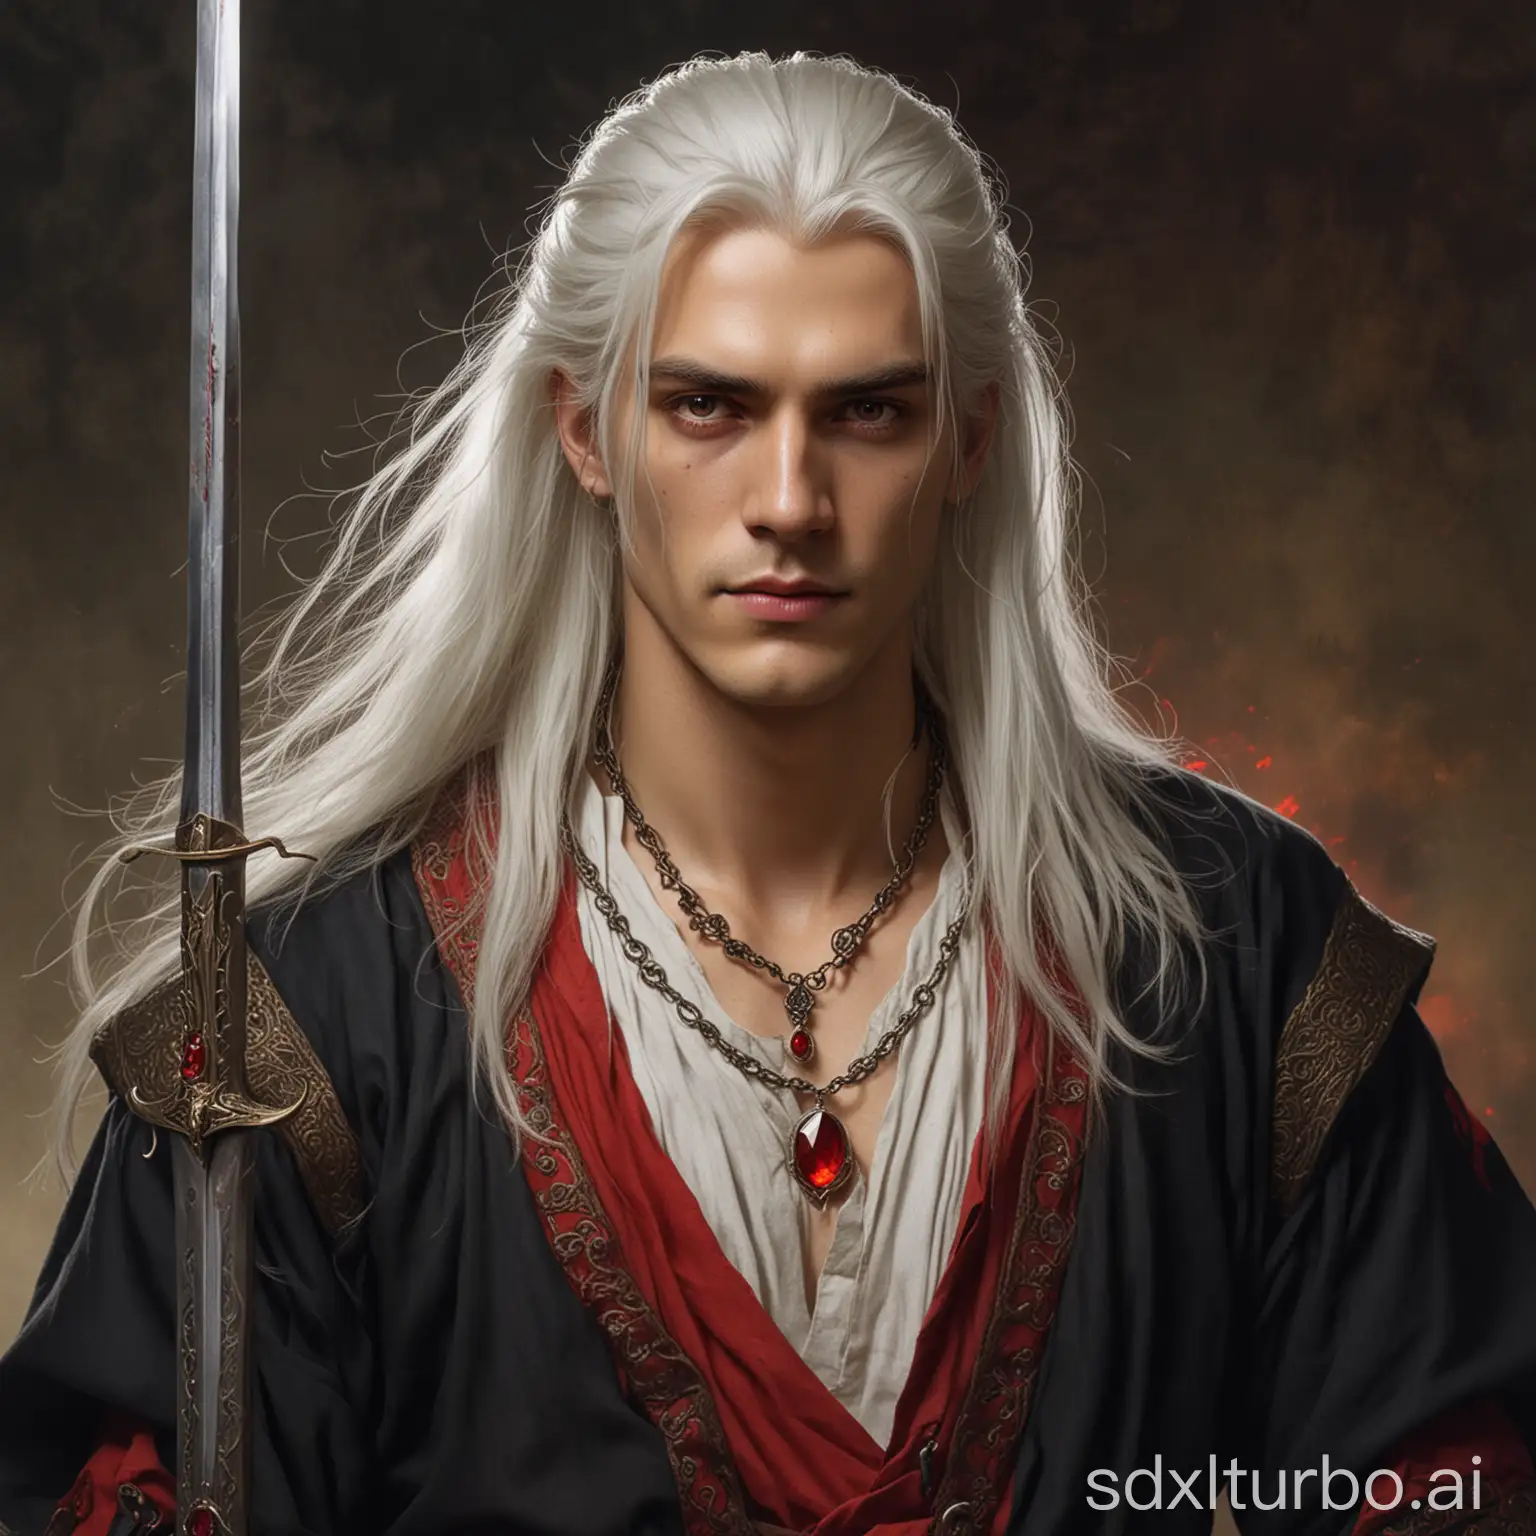 Young-Swordsman-with-Crimson-Eyes-and-Long-White-Hair-in-Medieval-Attire